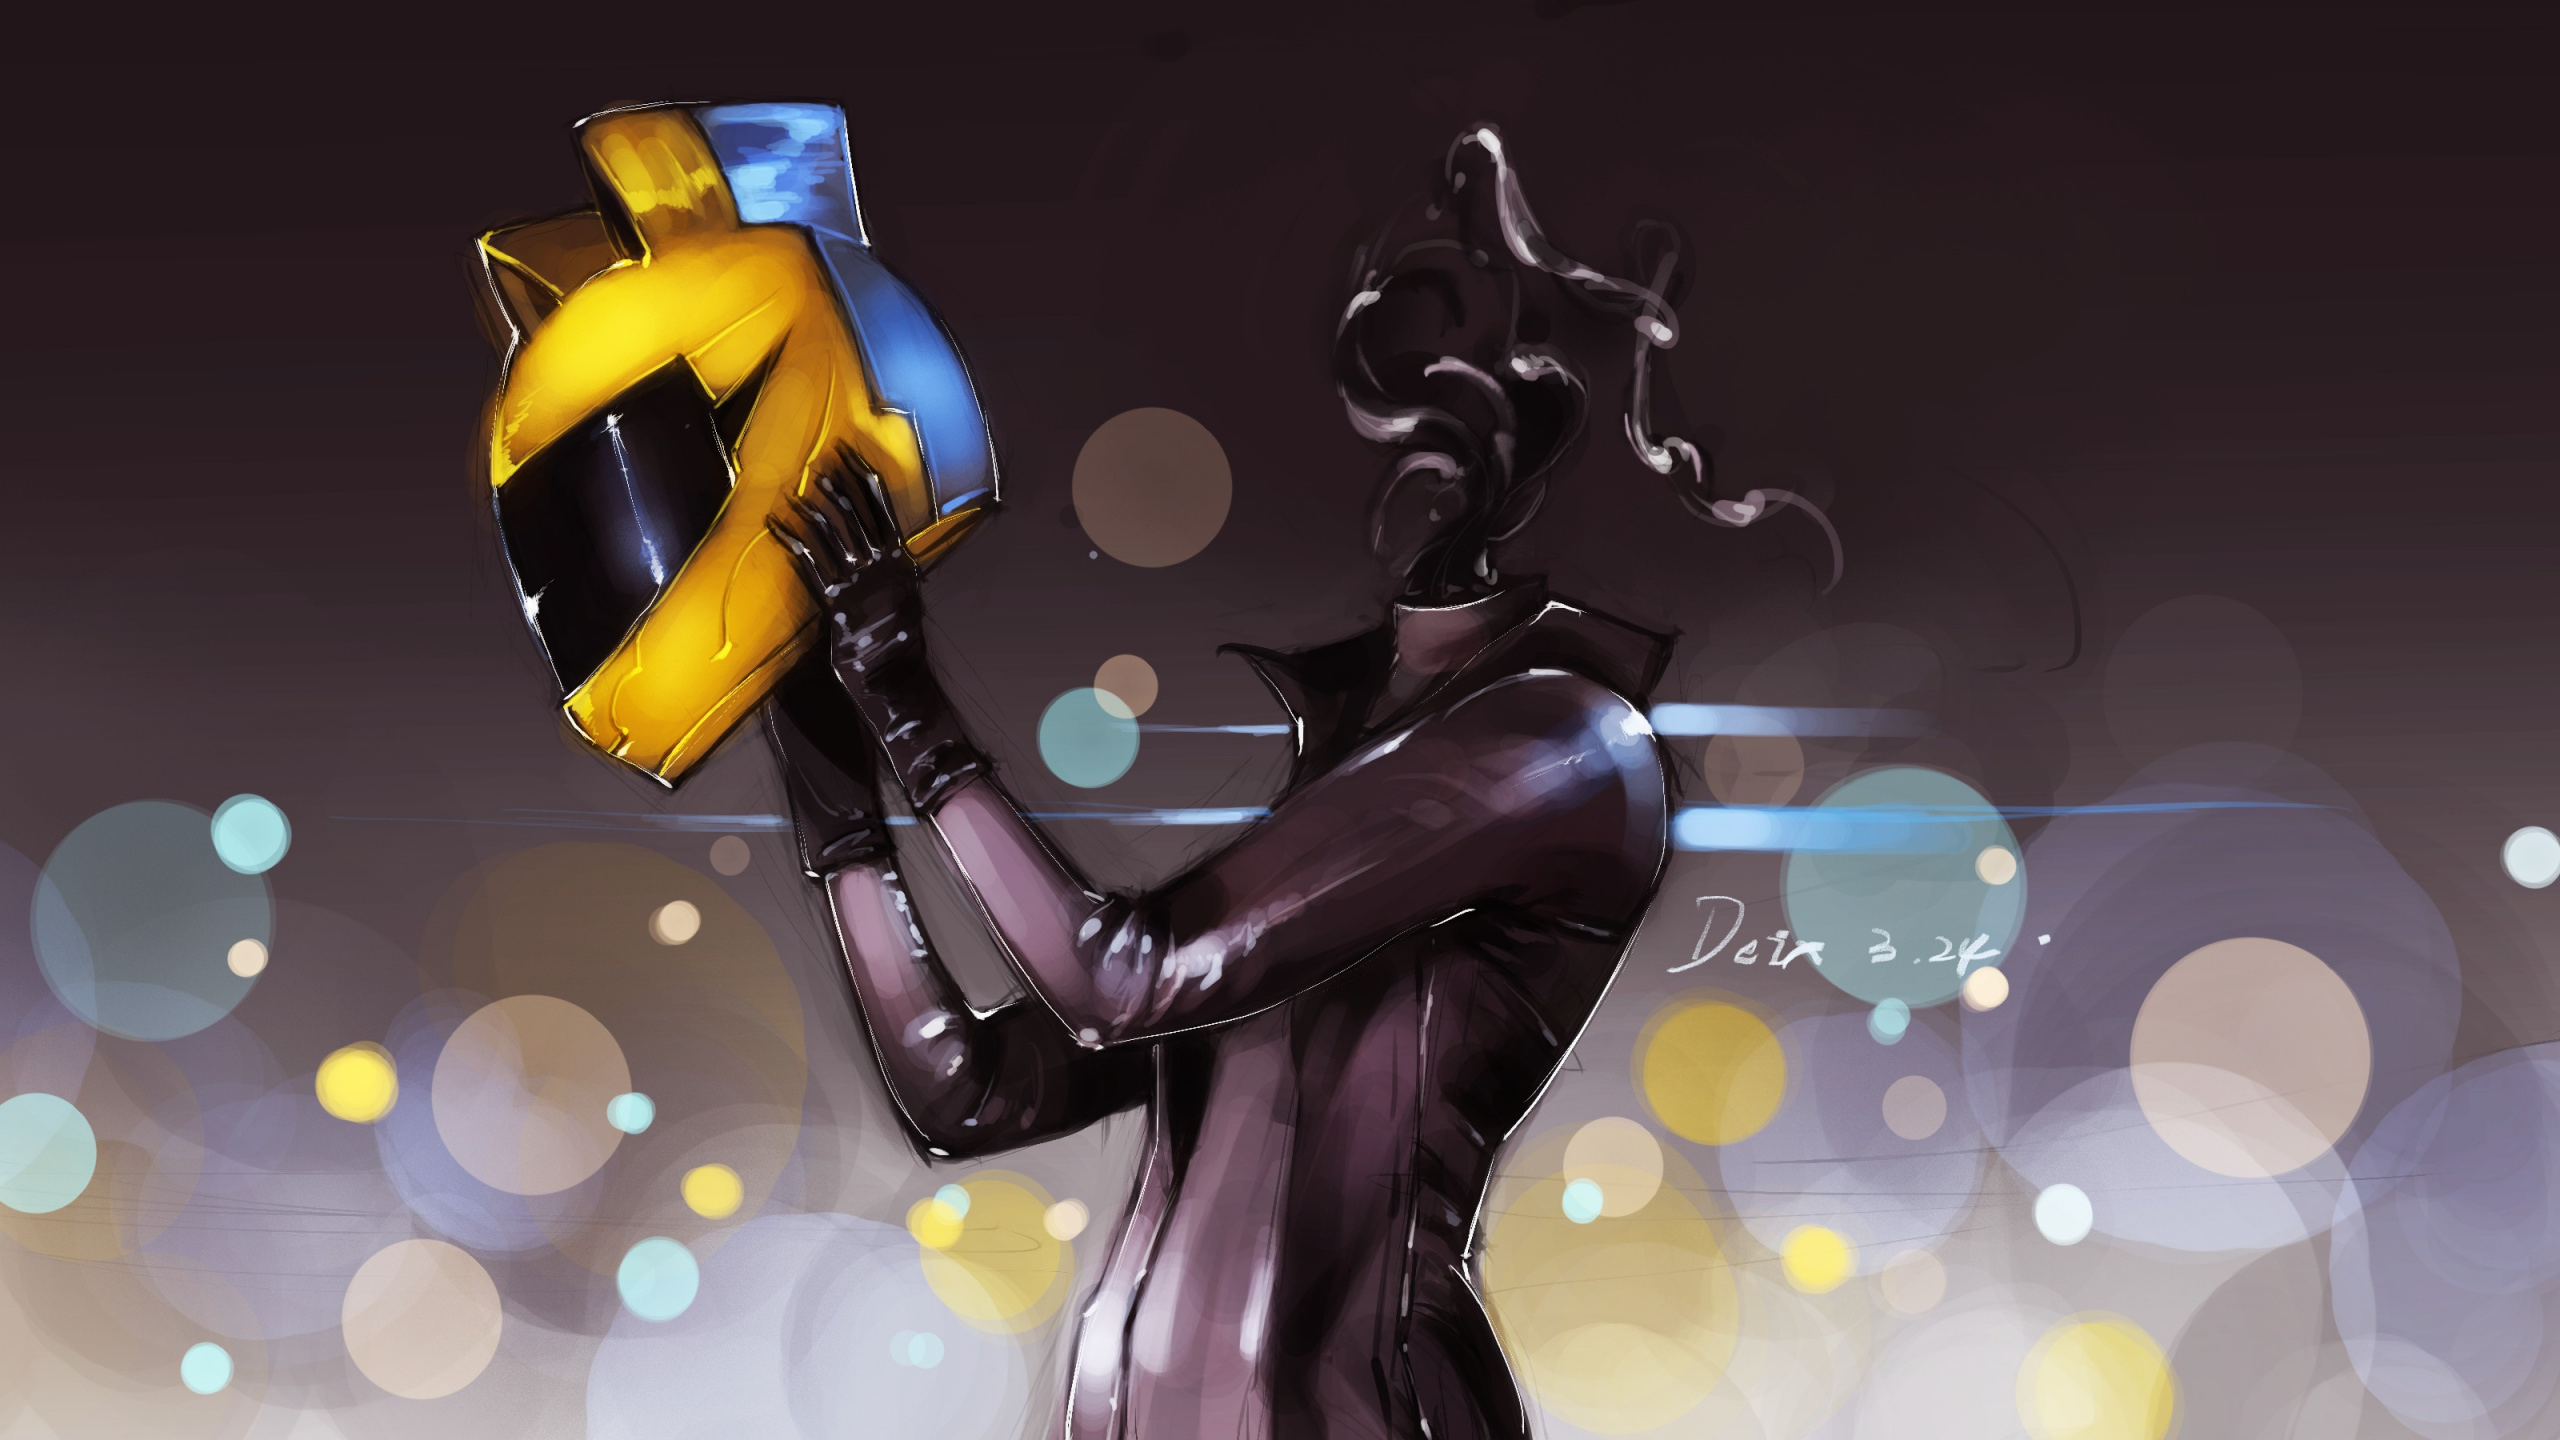 Black and Yellow Robot Illustration. Wallpaper in 2560x1440 Resolution